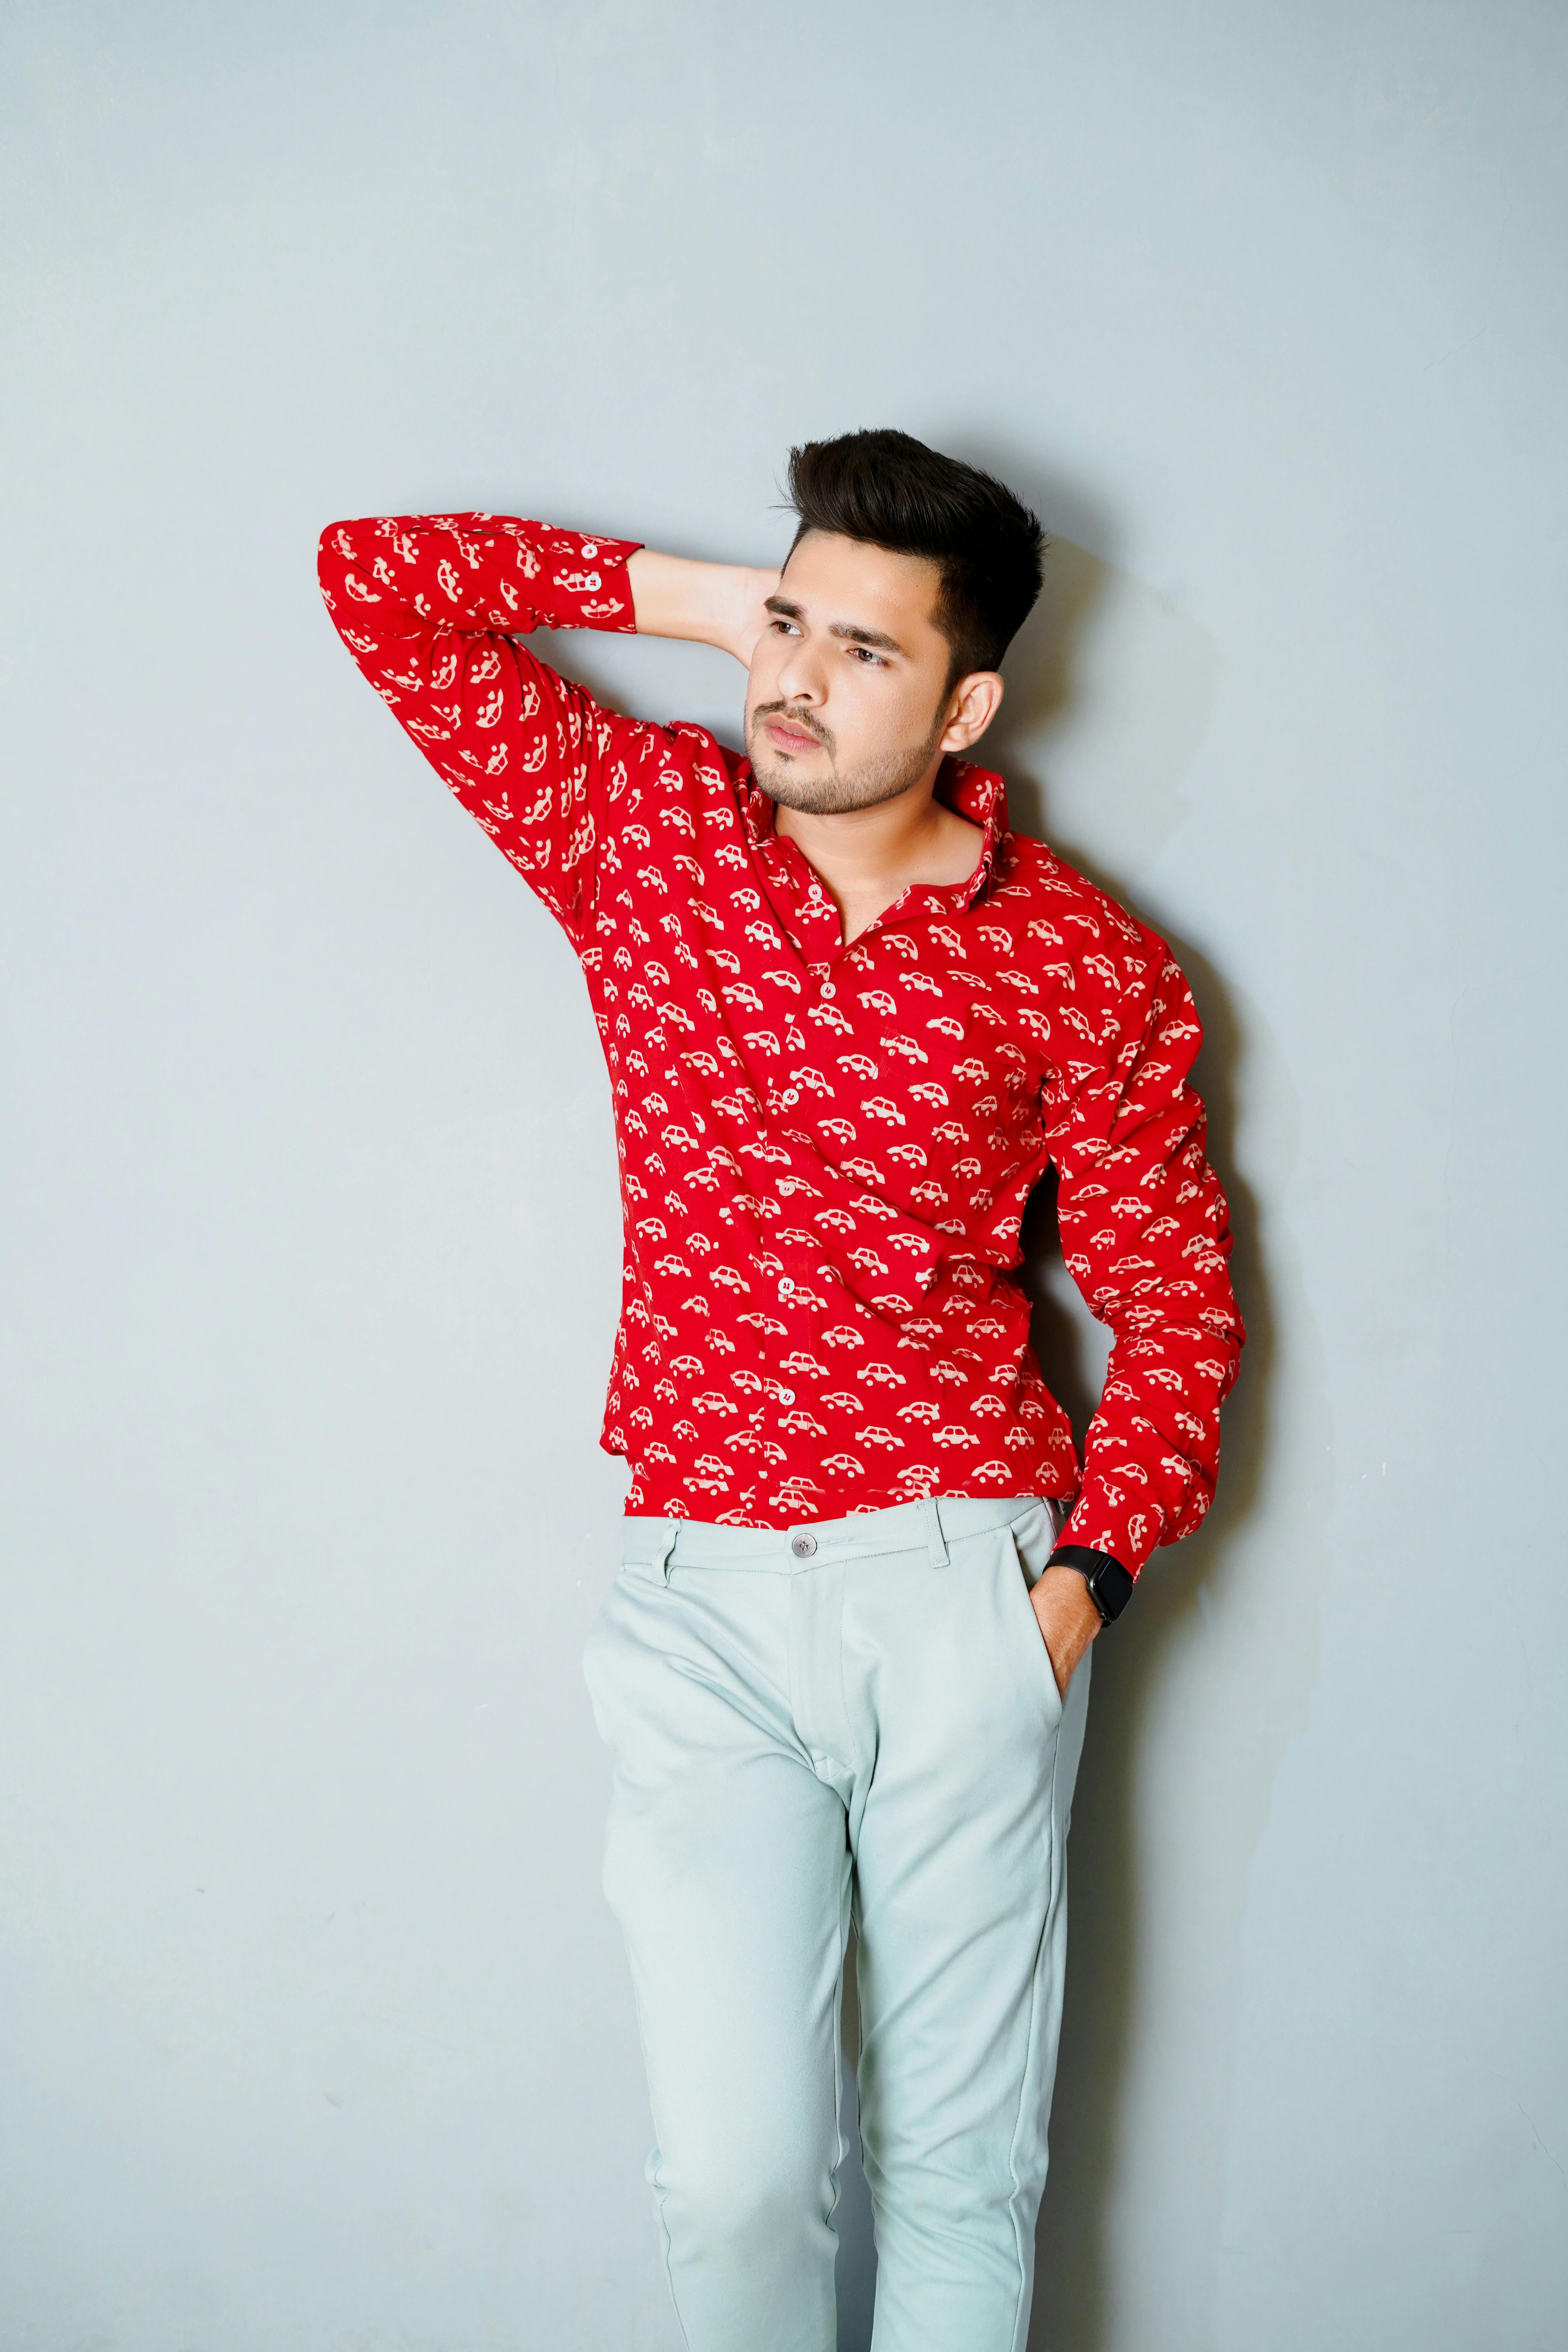 A man in a red shirt and white pants photo – Male Image on Unsplash